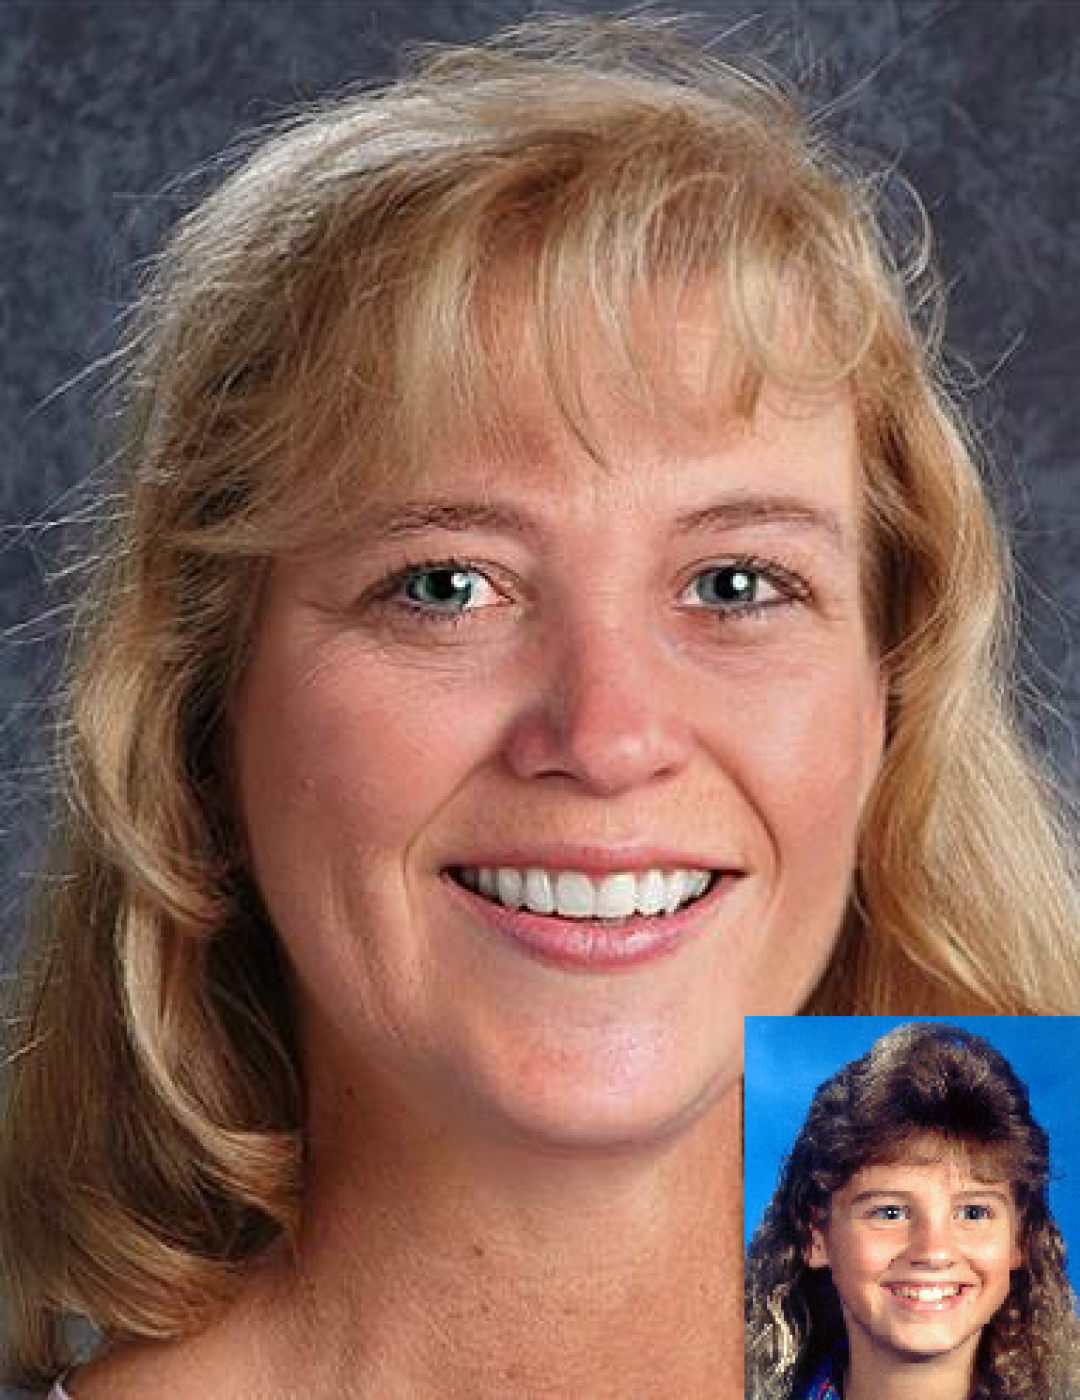 Gina Dawn Brooks. Missing girl with shoulder-length blonde hair and green eyes. Age progressed photo shows what Gina looks like at 45 years old: adult woman with shoulder-length blonde hair and green eyes.